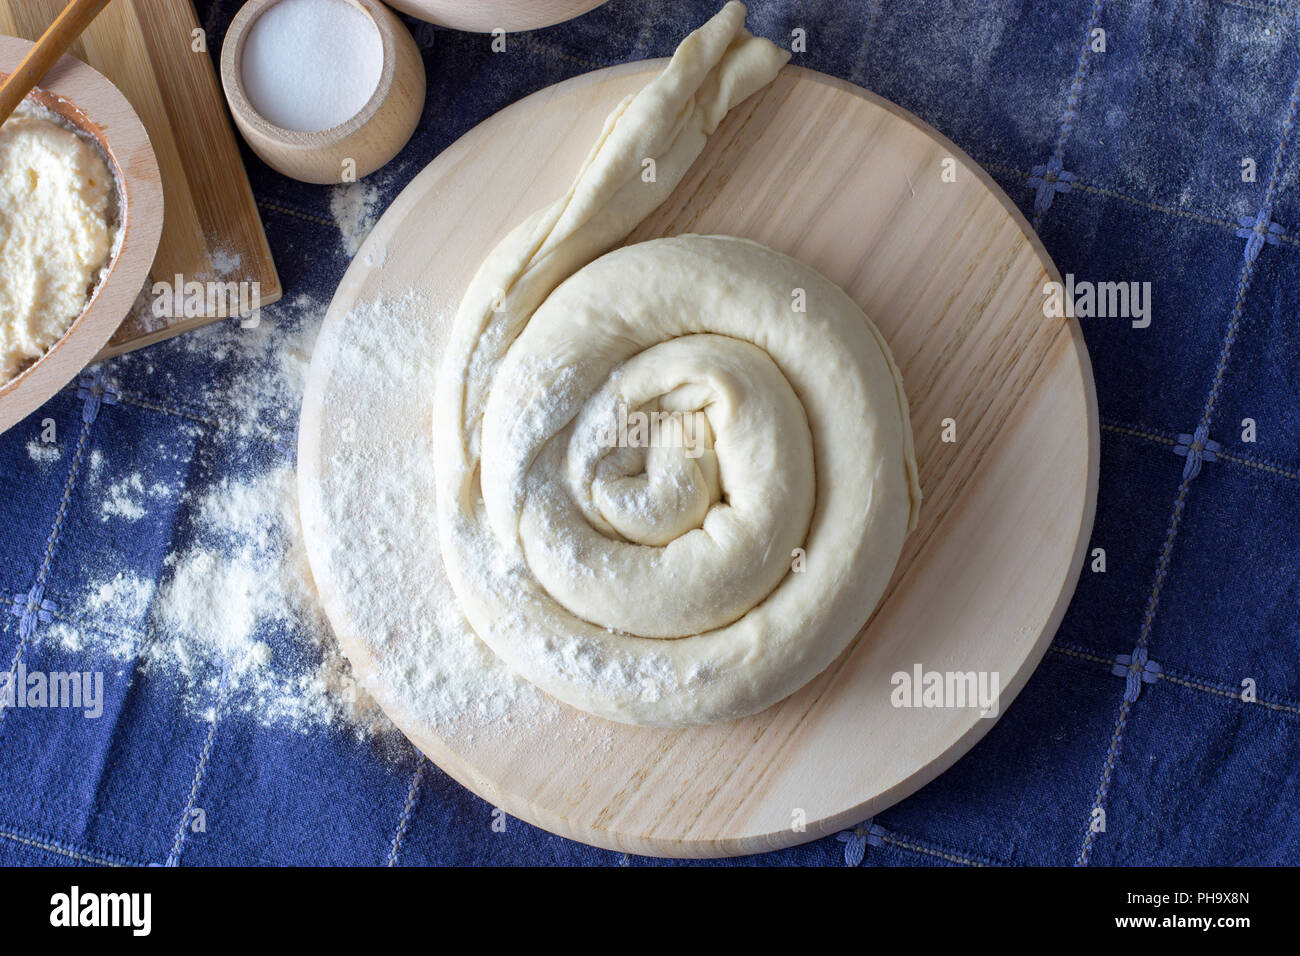 Cheese pie  on the wooden plate ready for baking Stock Photo